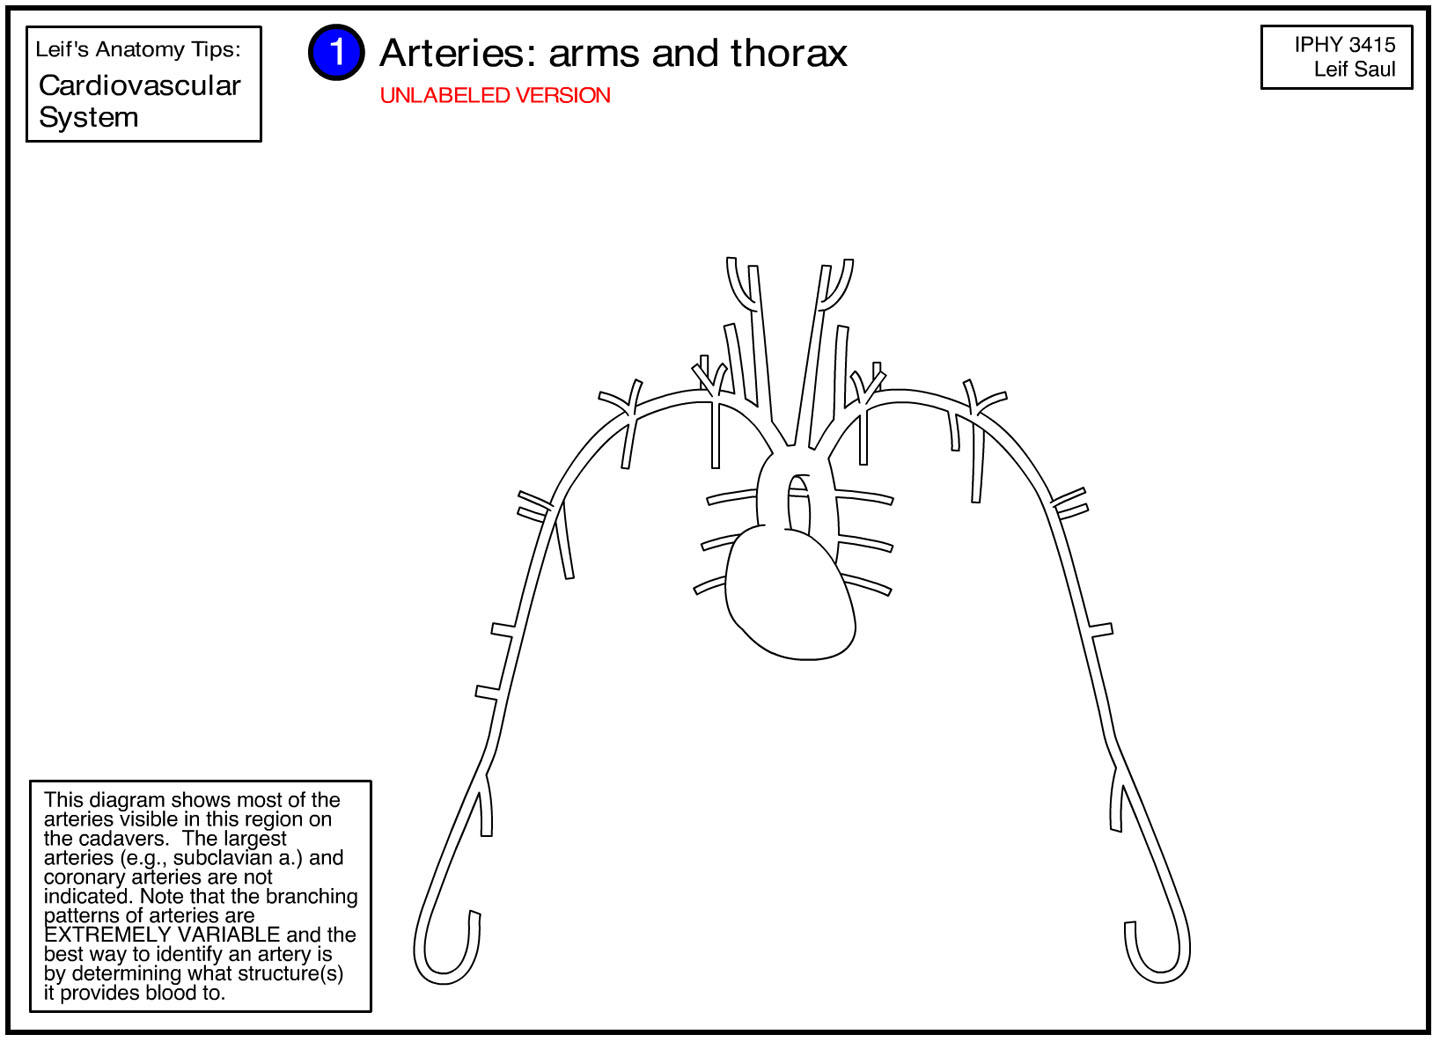 arteries of arms and thorax, unlabeled